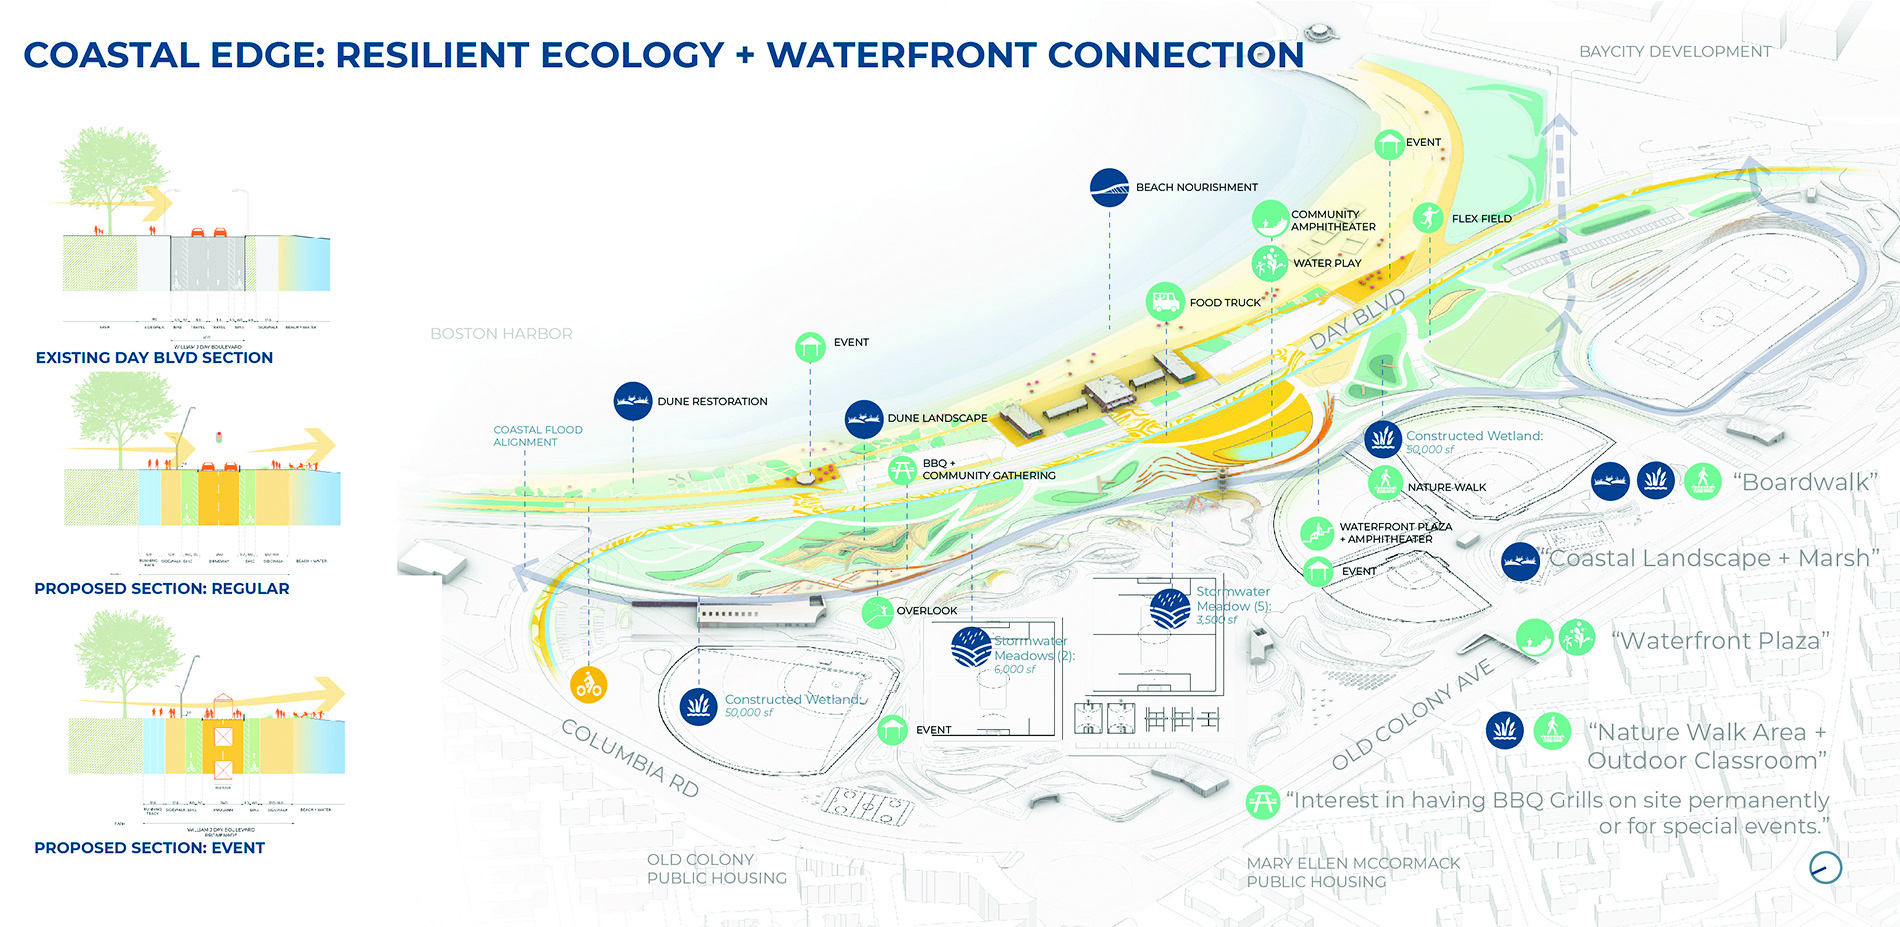 Coastal Edge: Resilient Ecology and Waterfront Connection